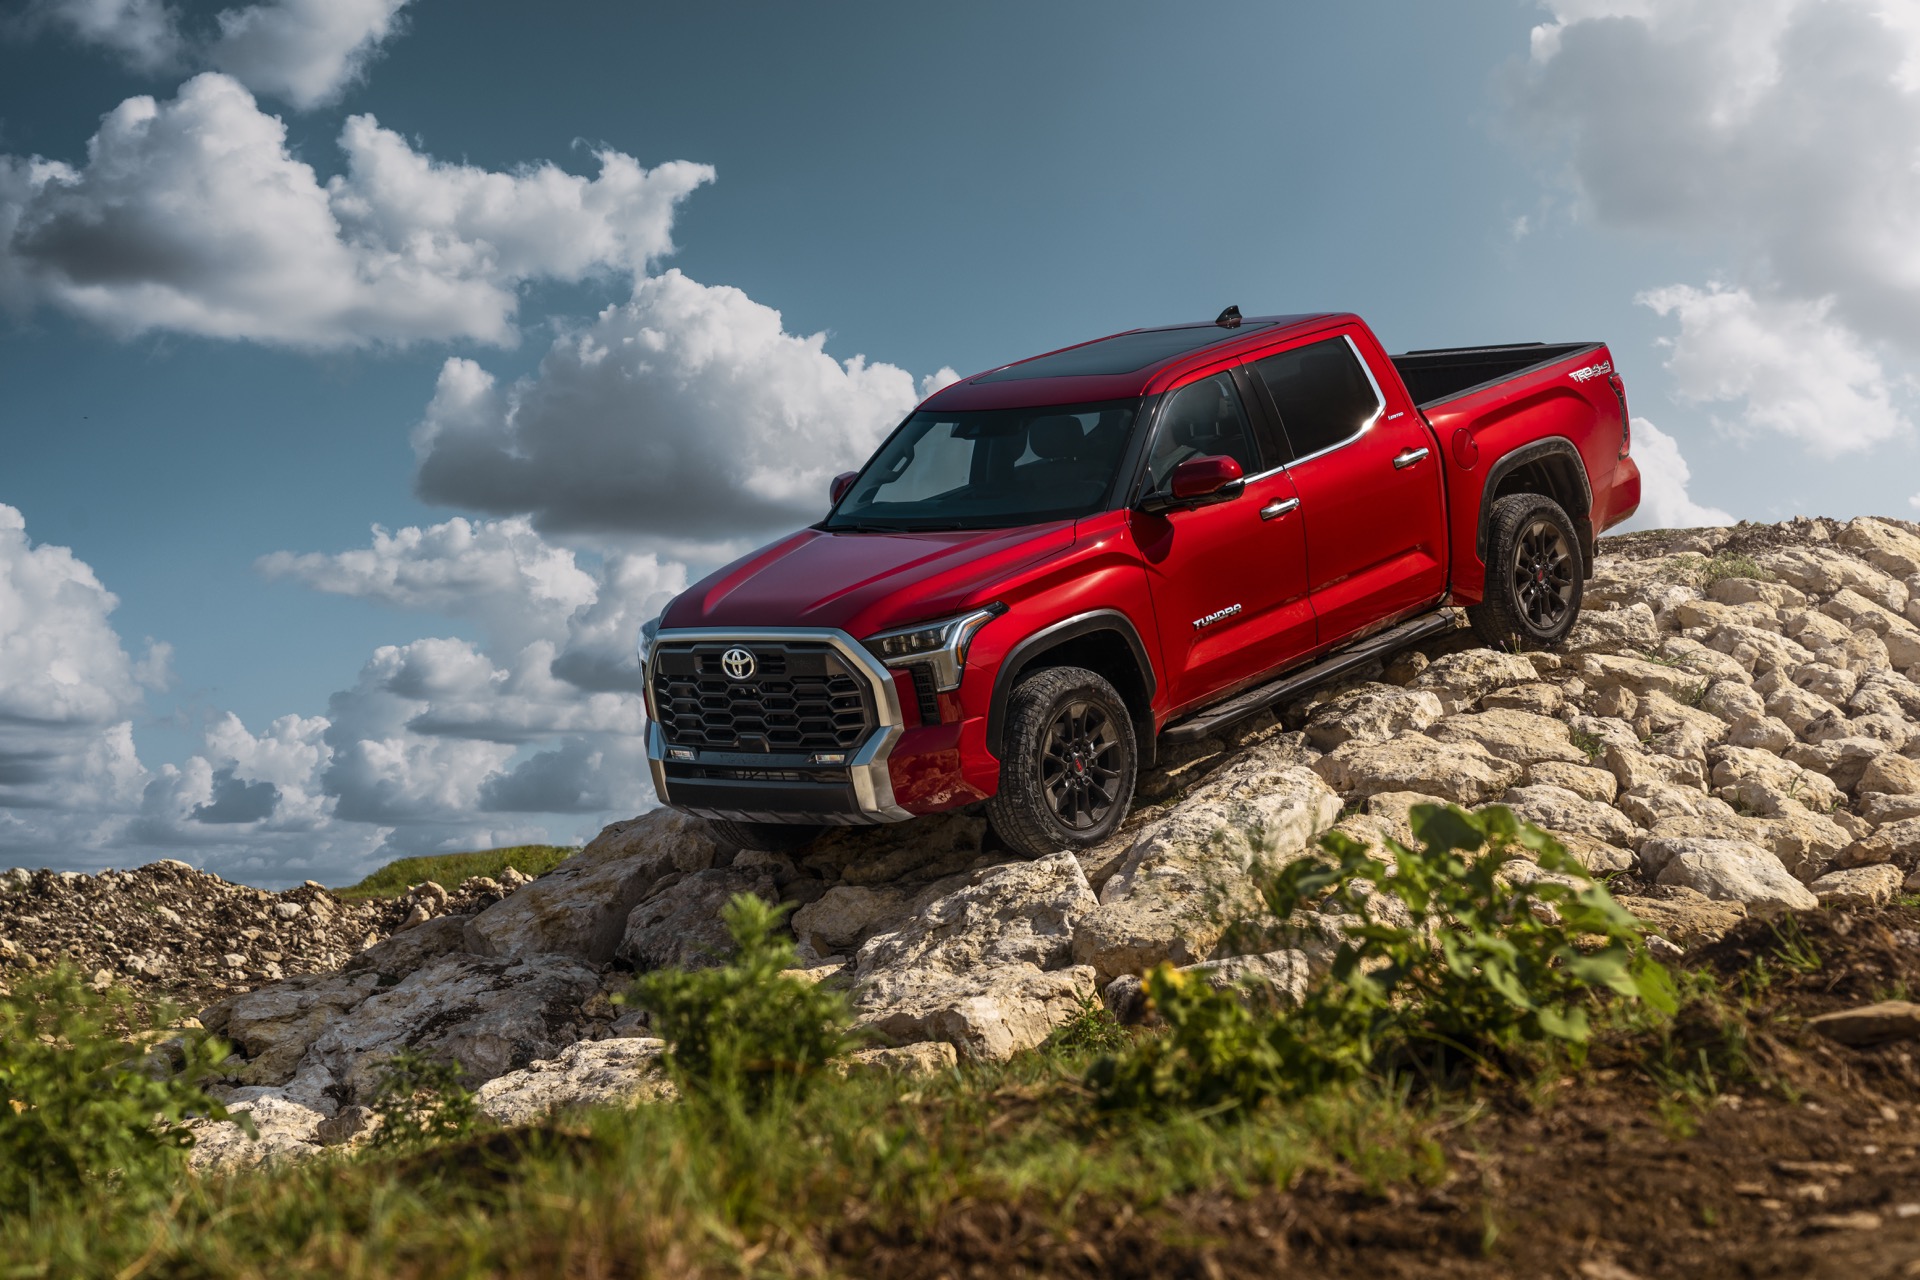 Preview: 2022 Toyota Tundra arrives with new platform, V-6 power, rear